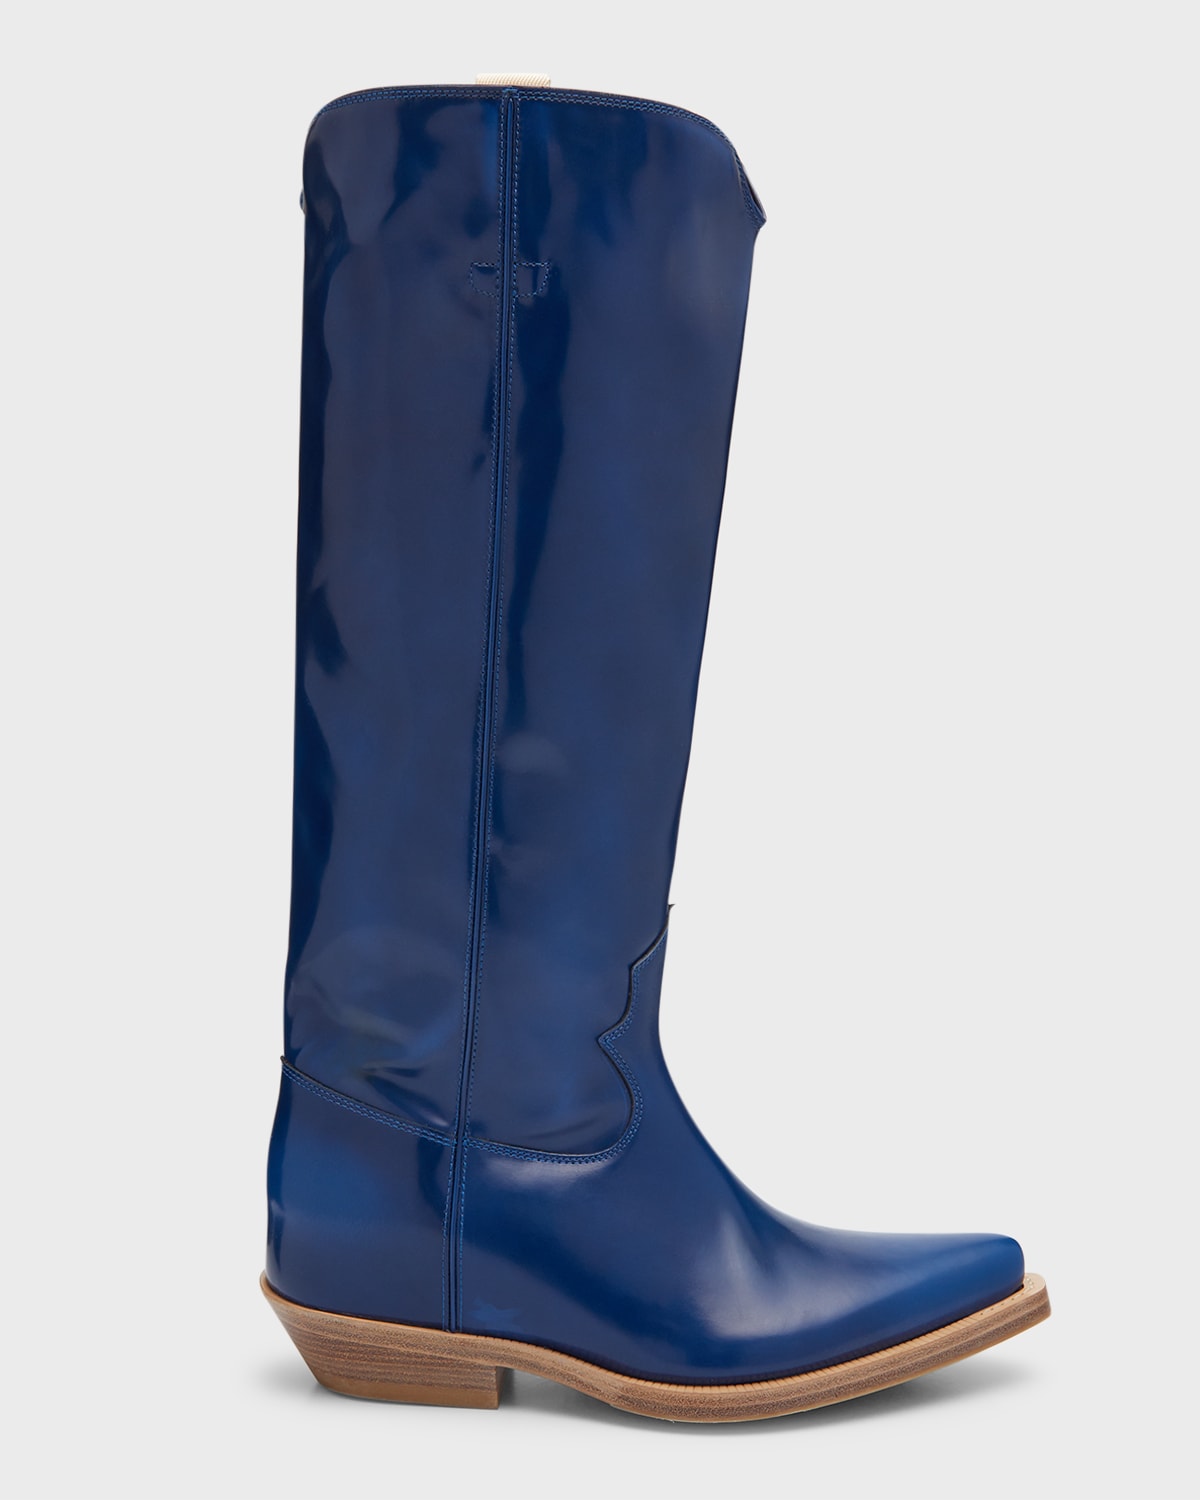 CHLOÉ NELLIE LEATHER TALL WESTERN BOOTS